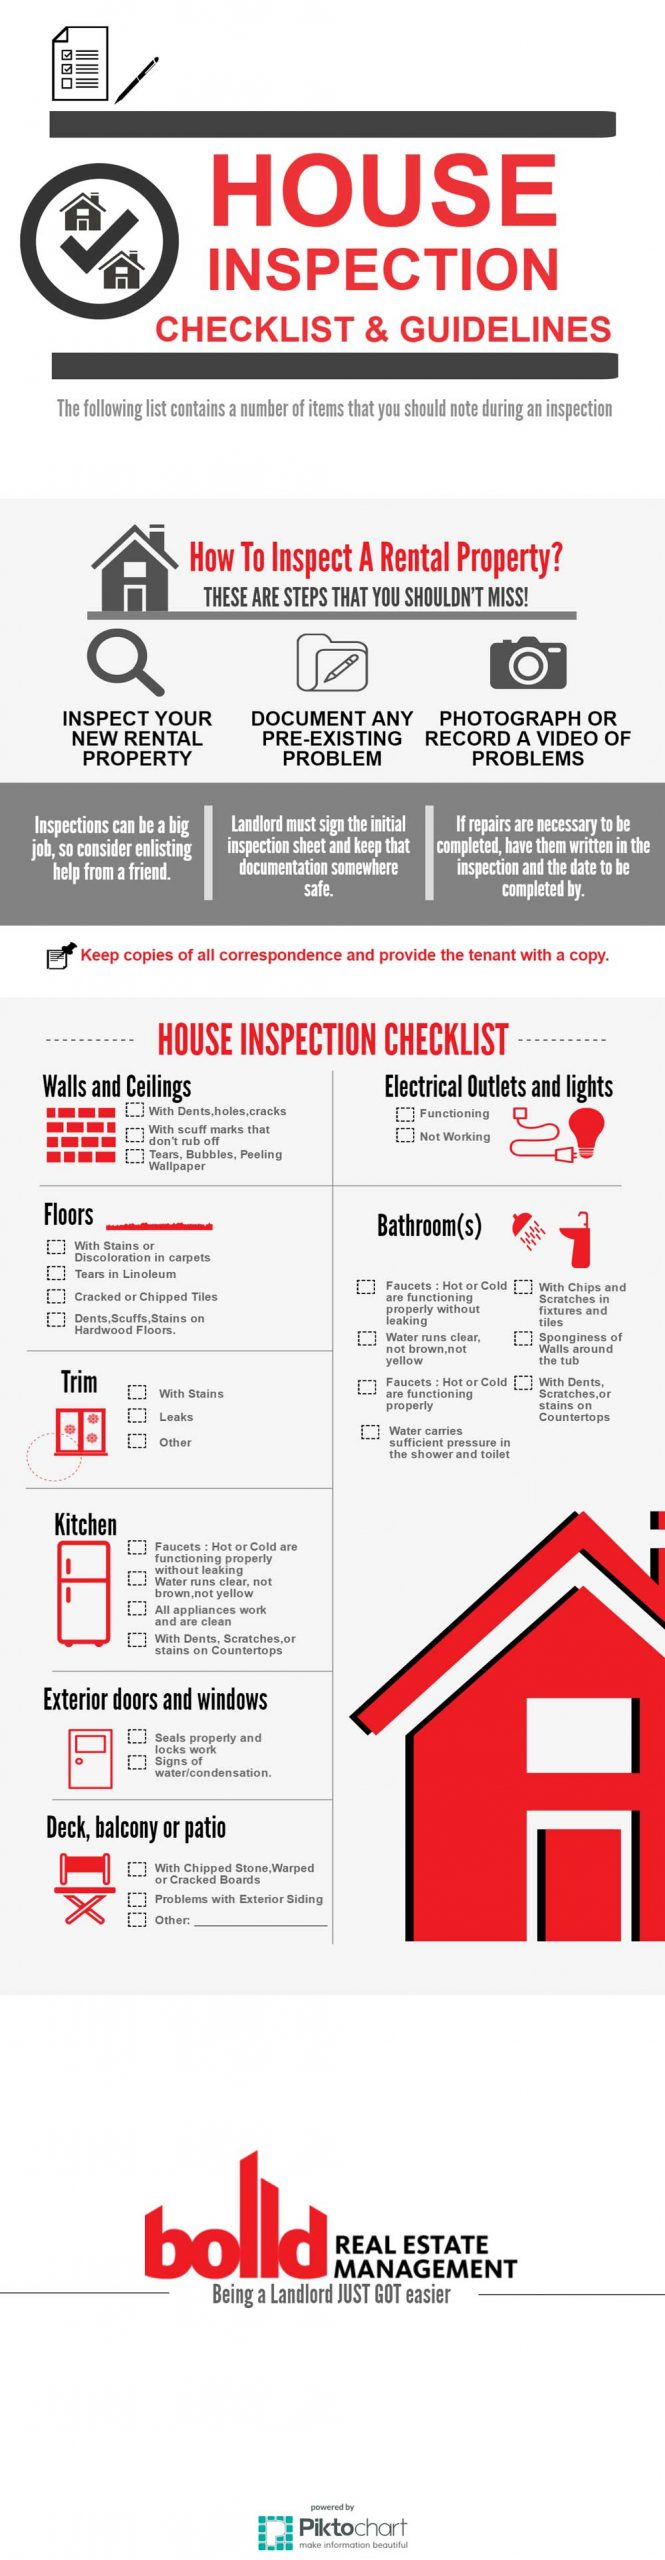 house-inspection